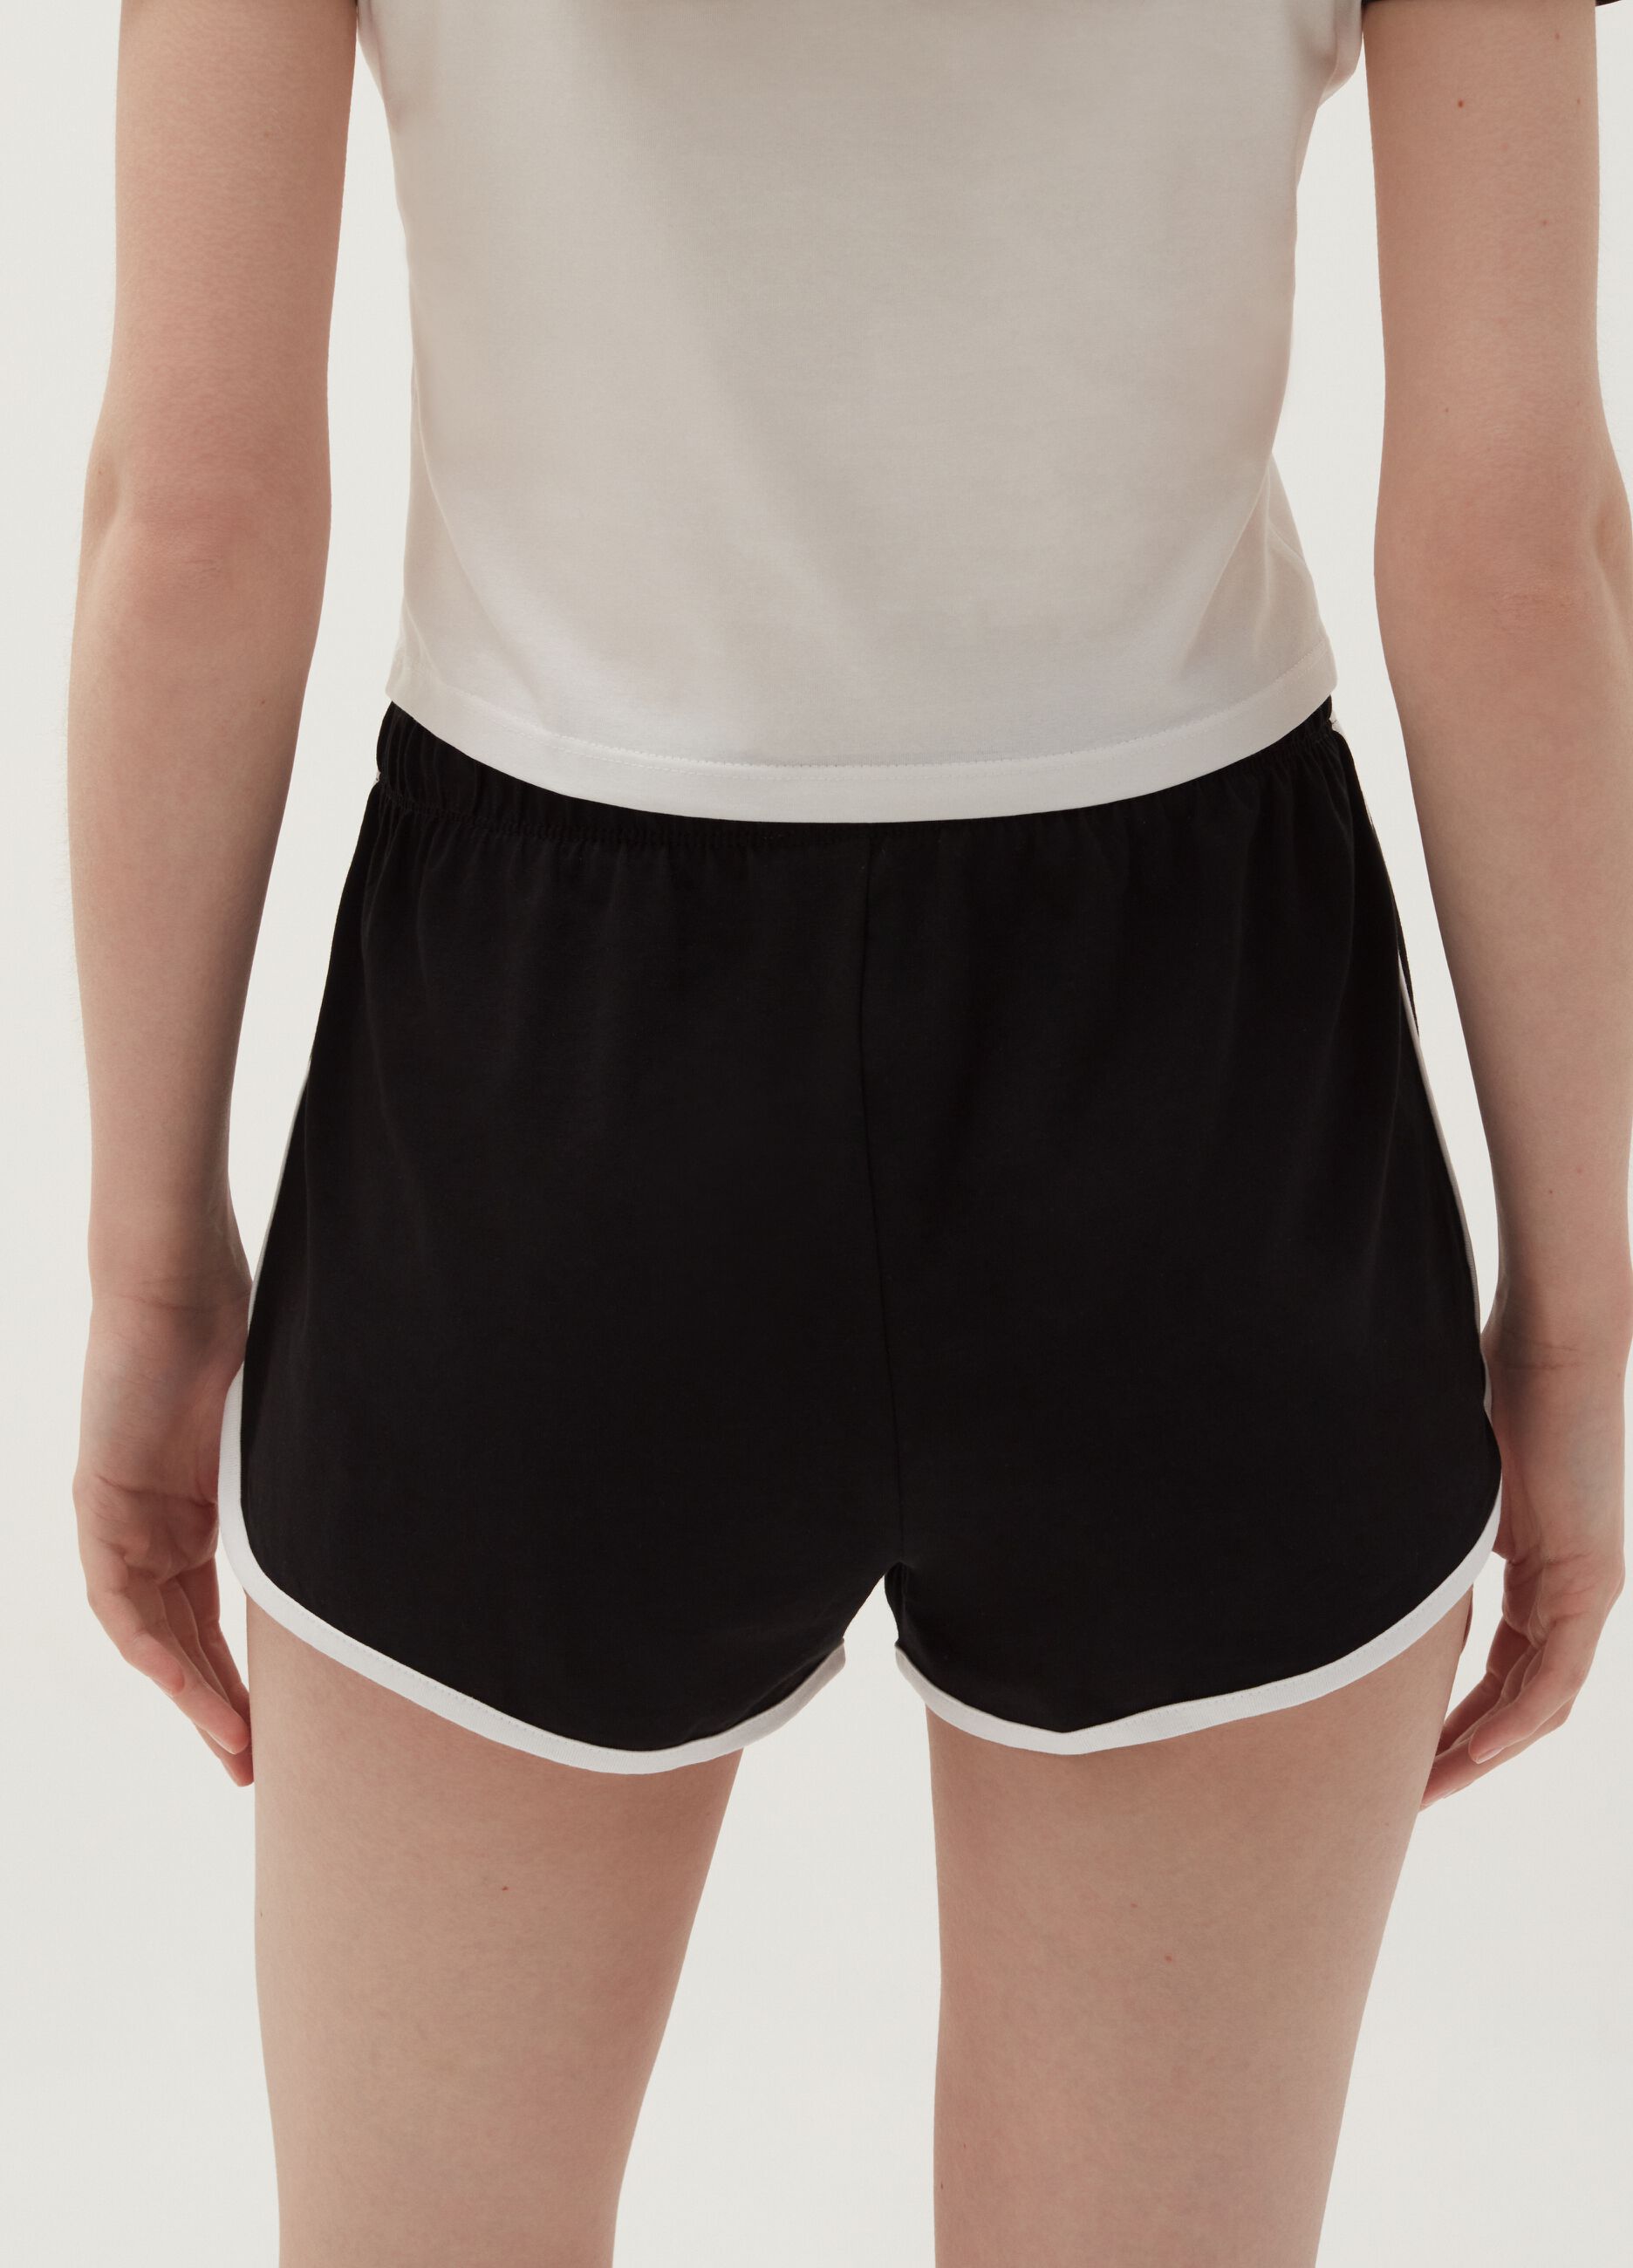 Baby Angel cotton shorts with contrasting trims.